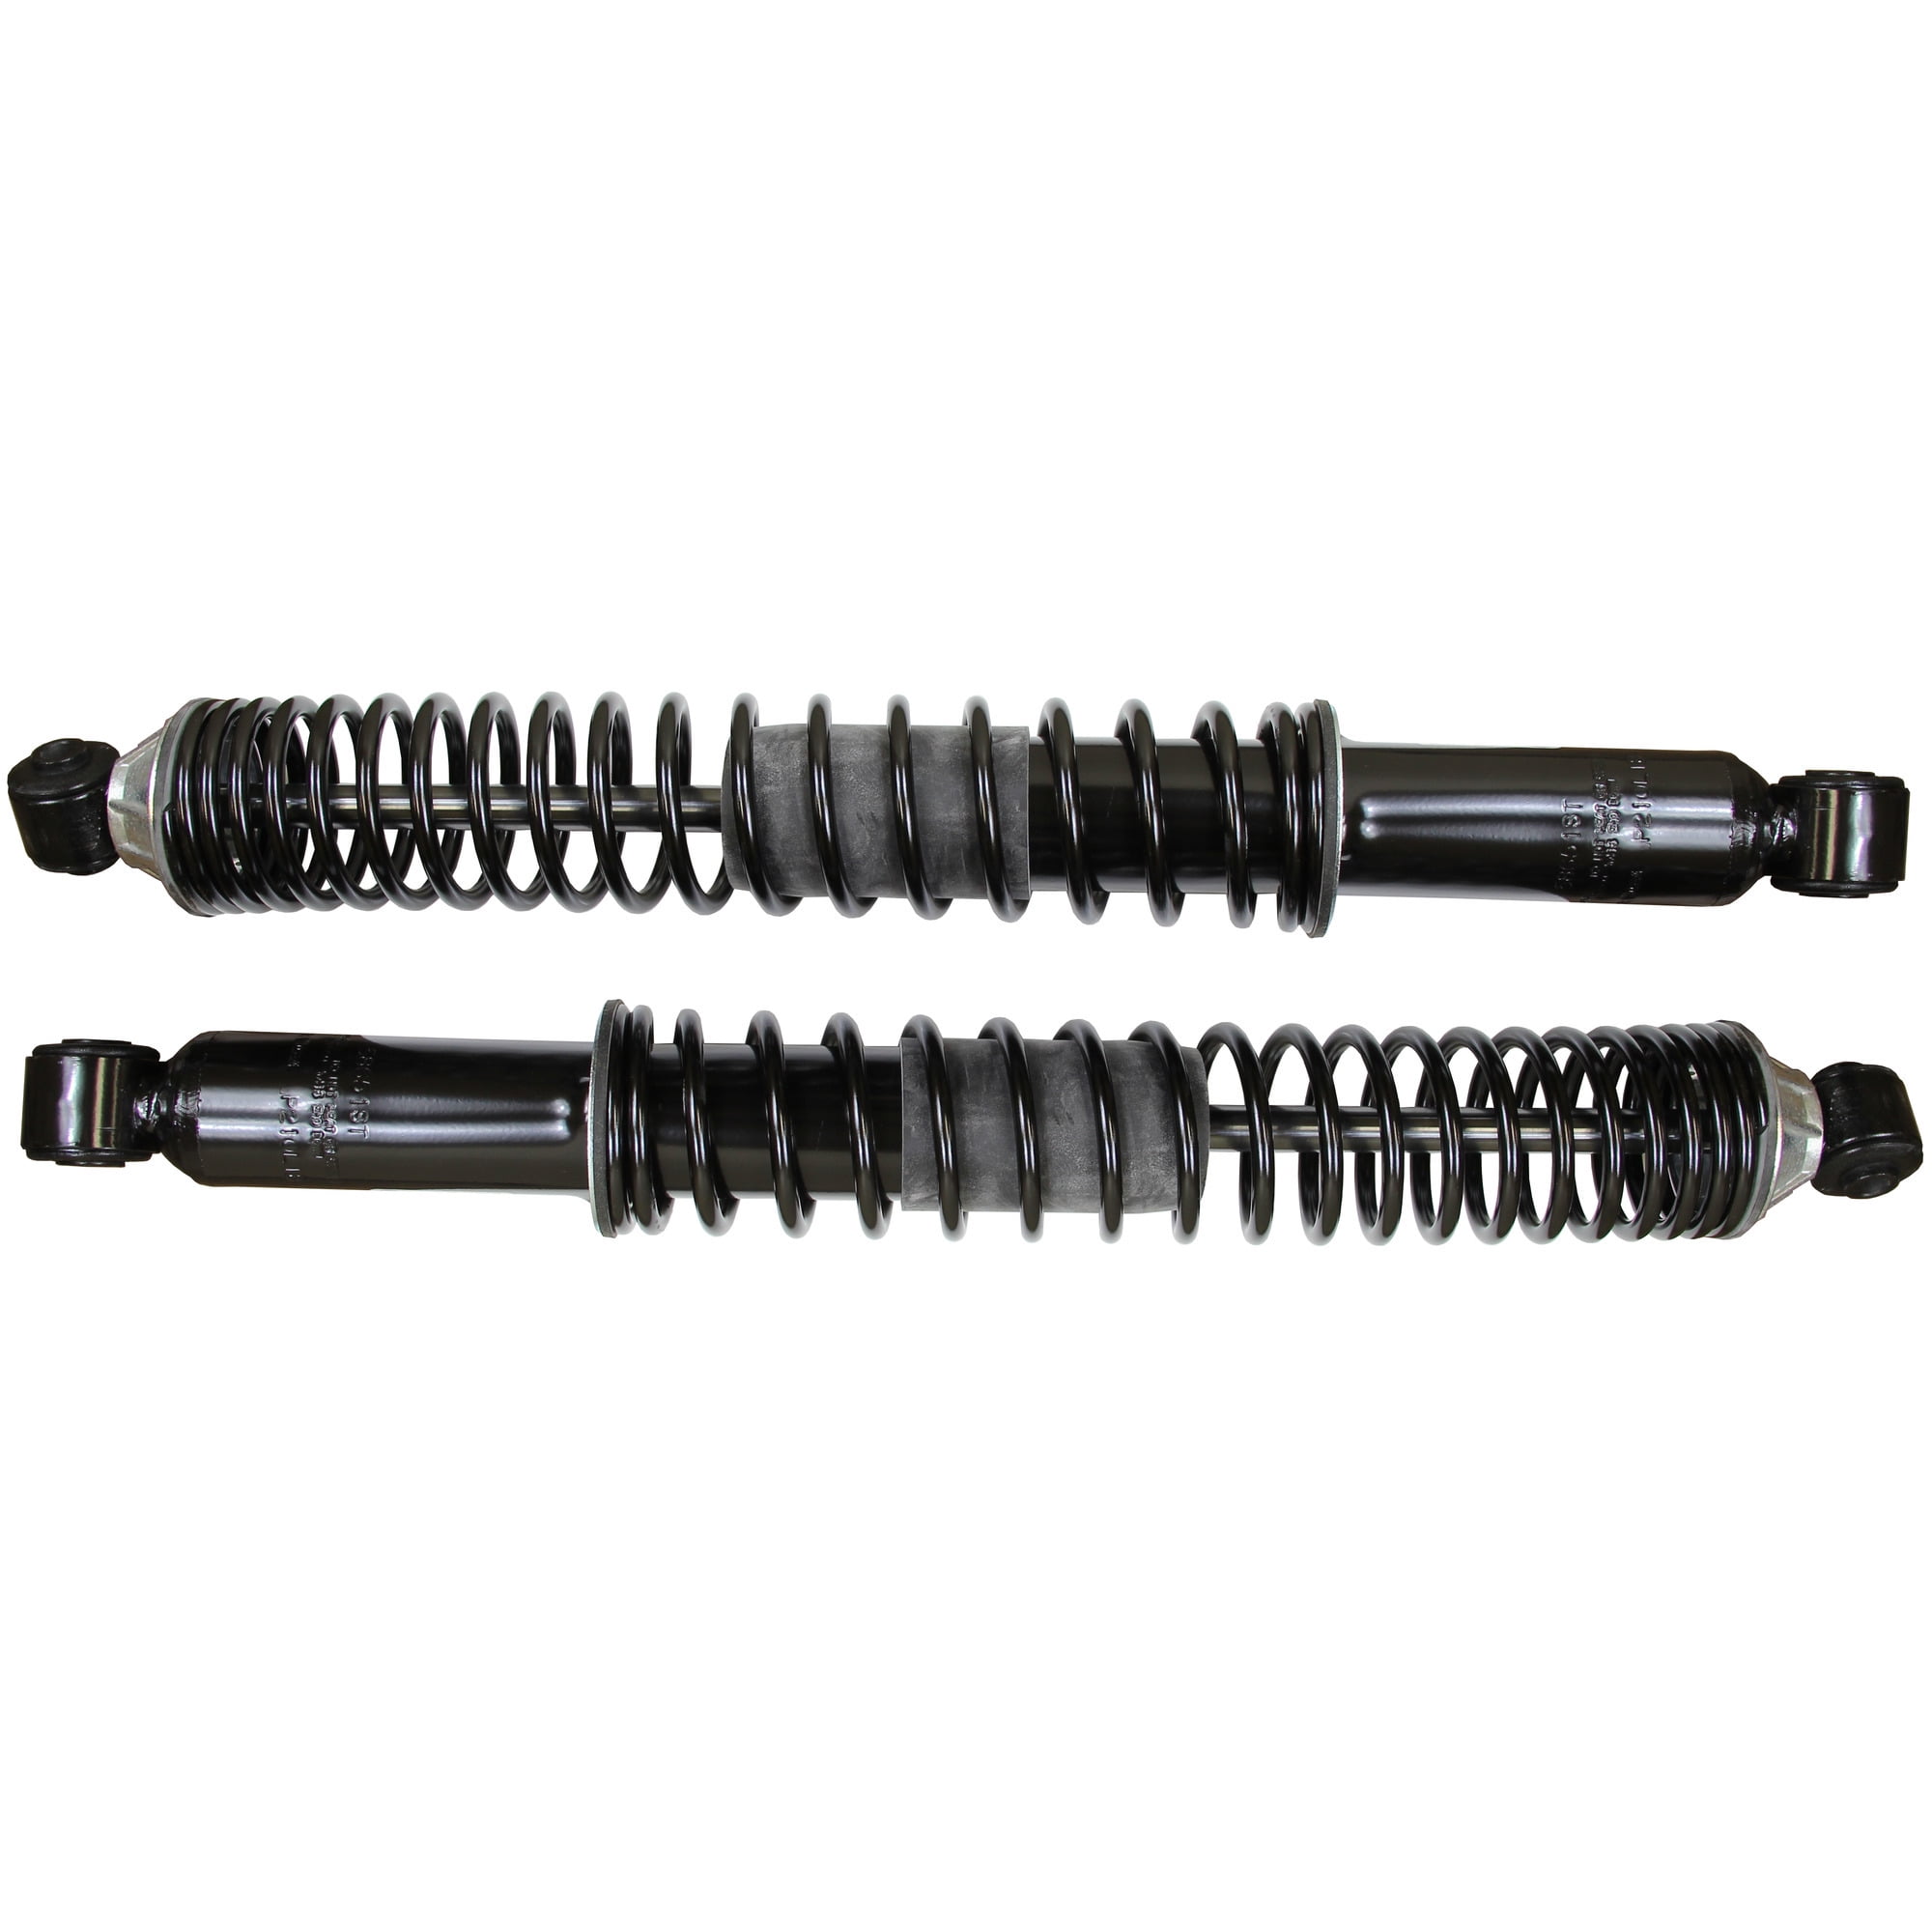 2 pc Monroe Monro-Matic Plus Front Shock Absorbers for 1998-2011 Ford Ranger hn